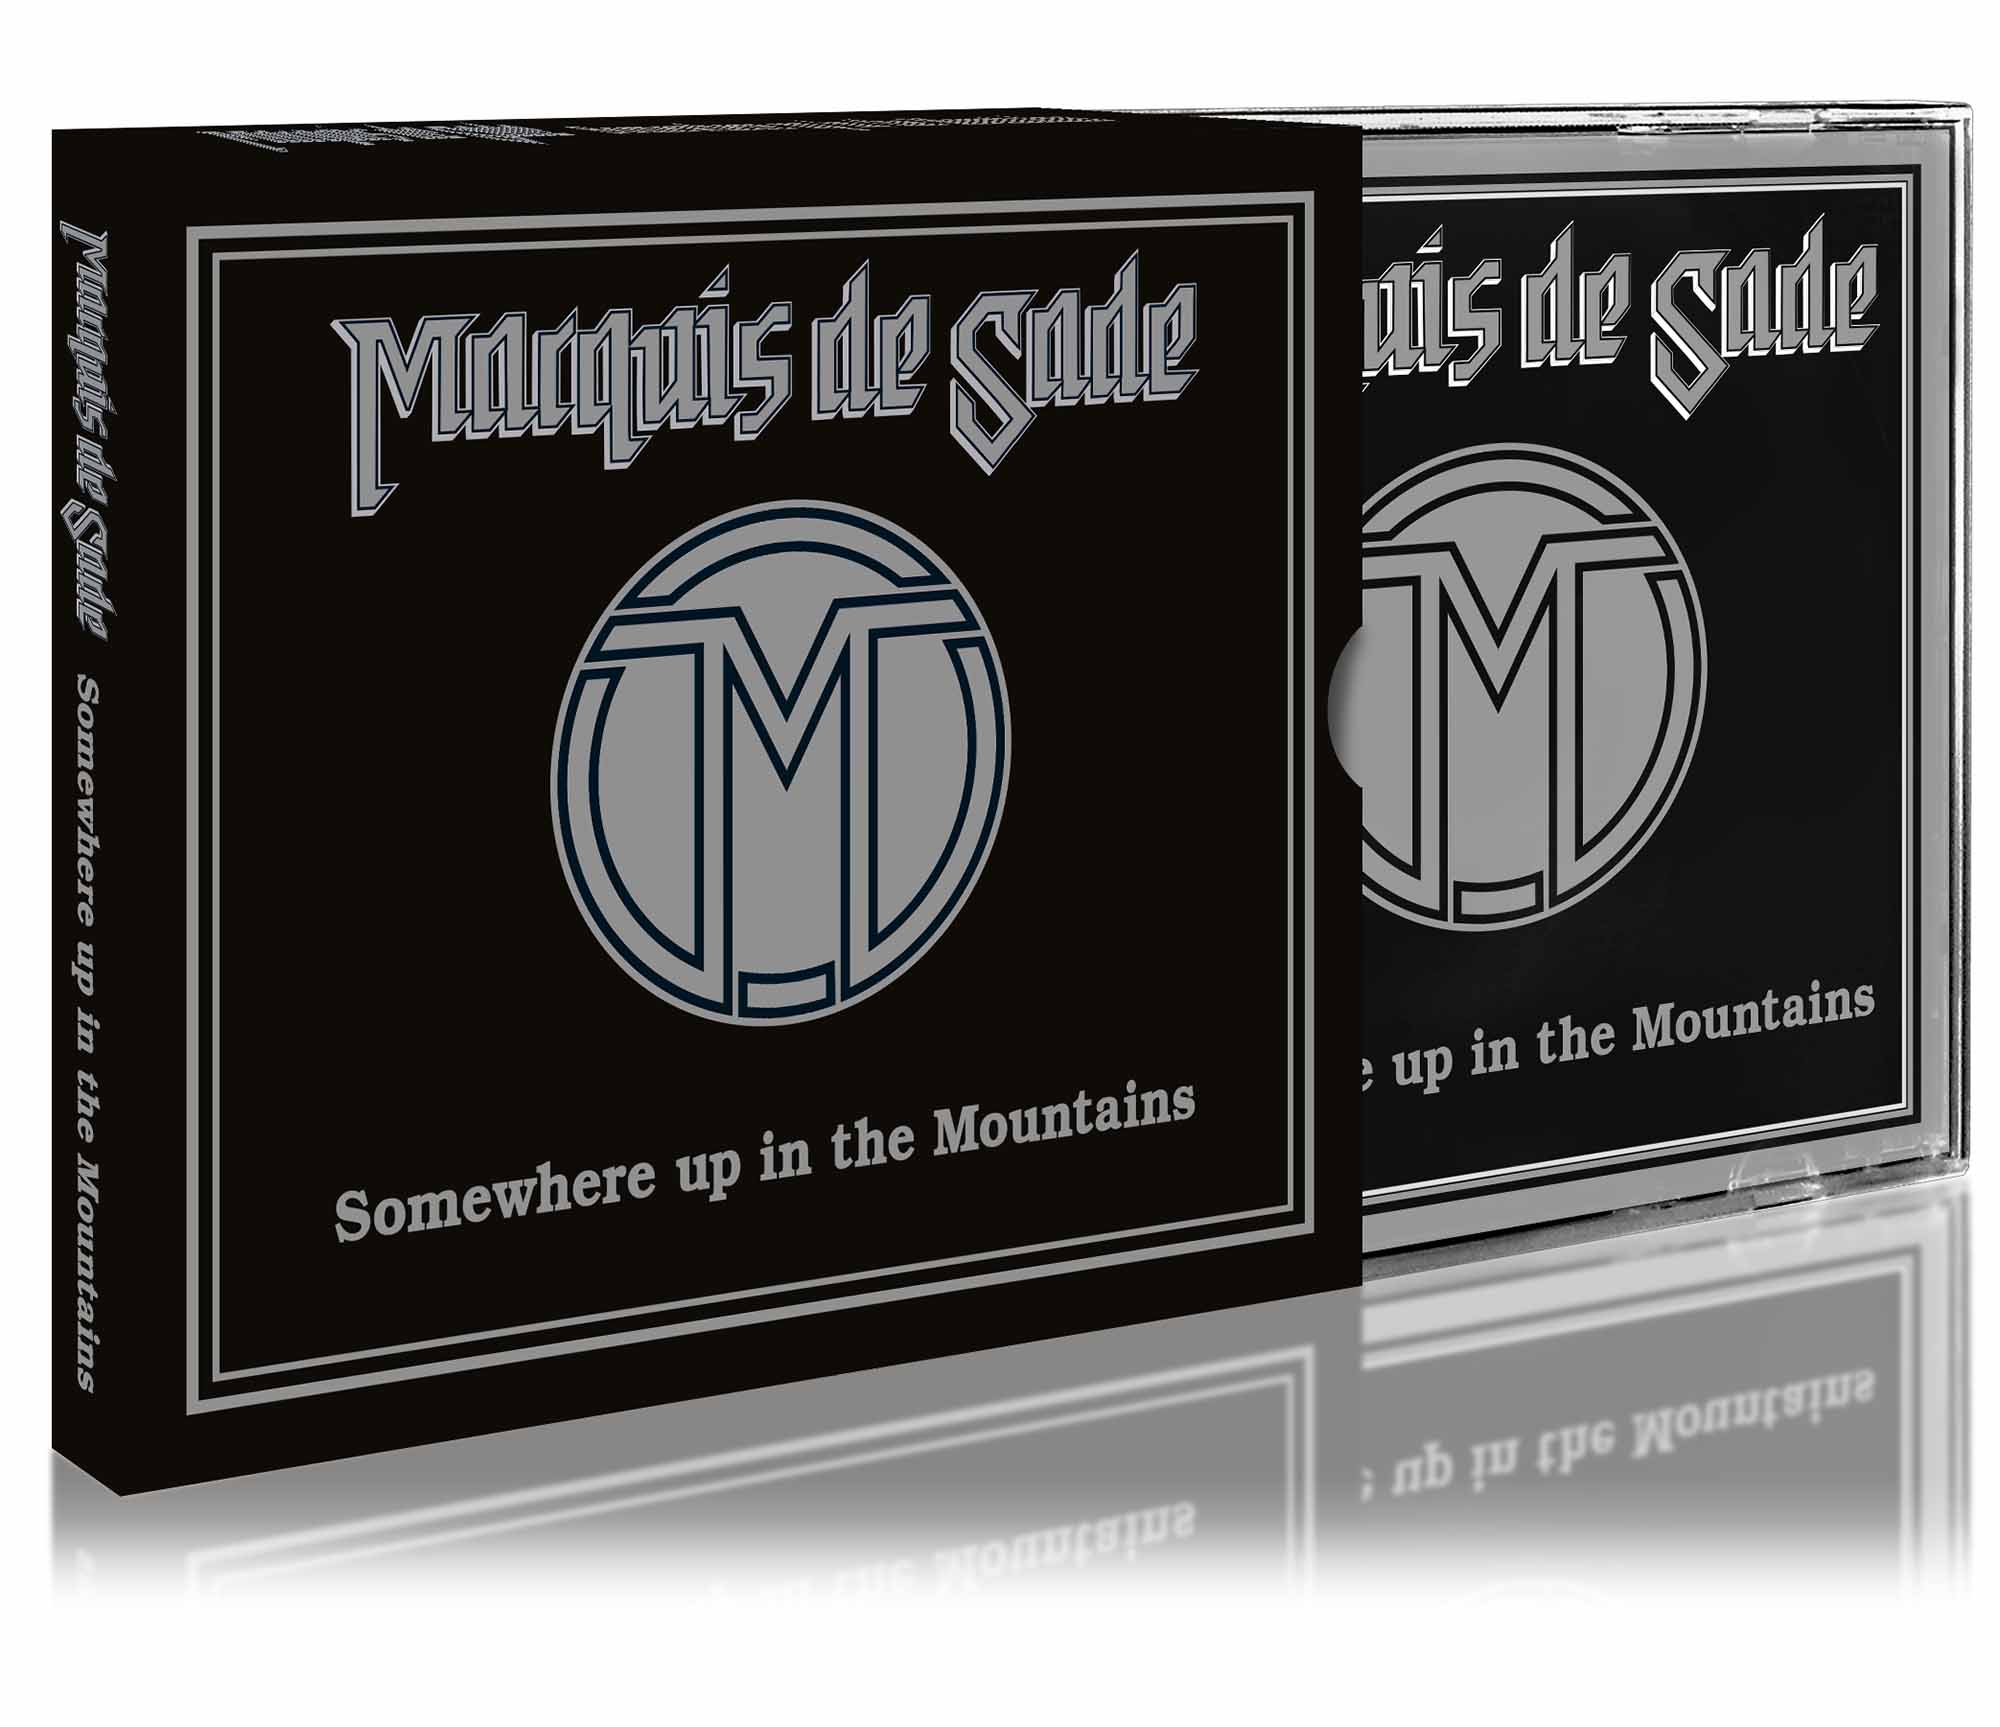 MARQUIS DE SADE - Somewhere Up in the Mountains  CD